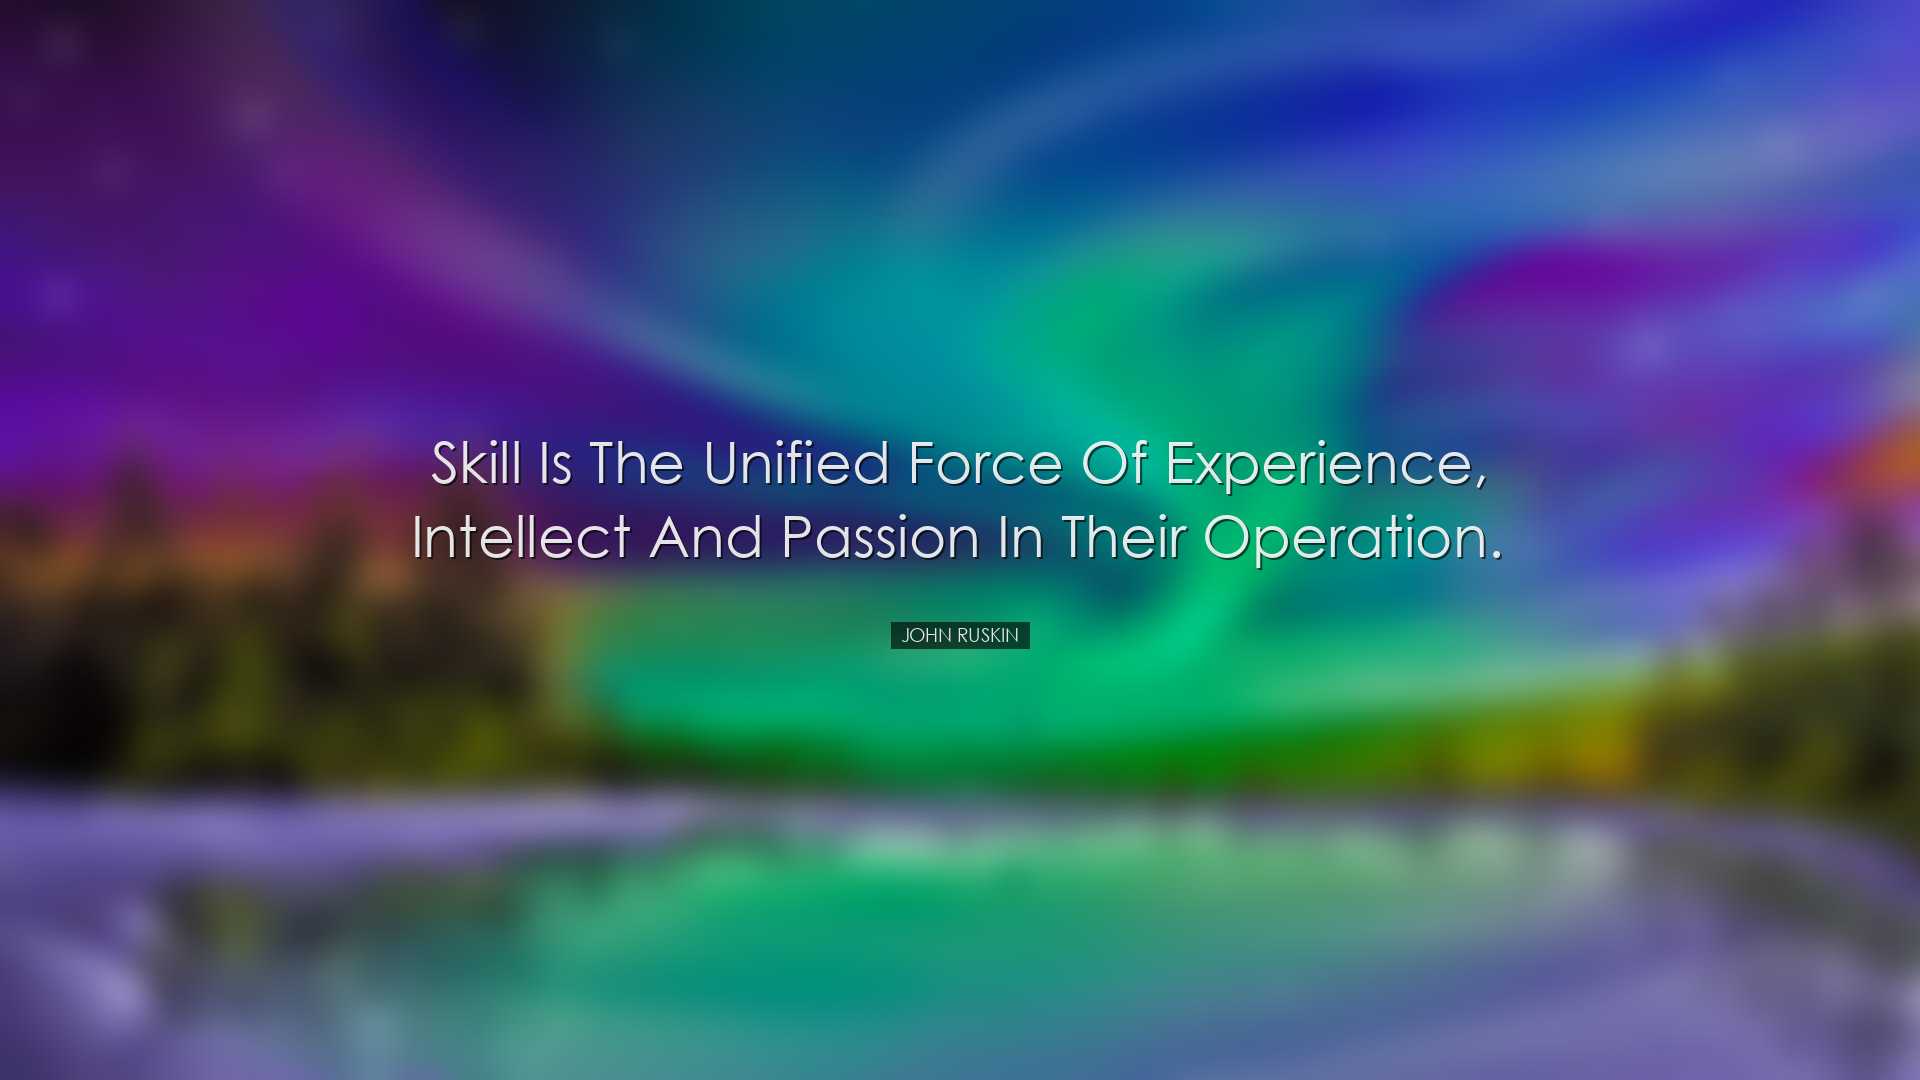 Skill is the unified force of experience, intellect and passion in